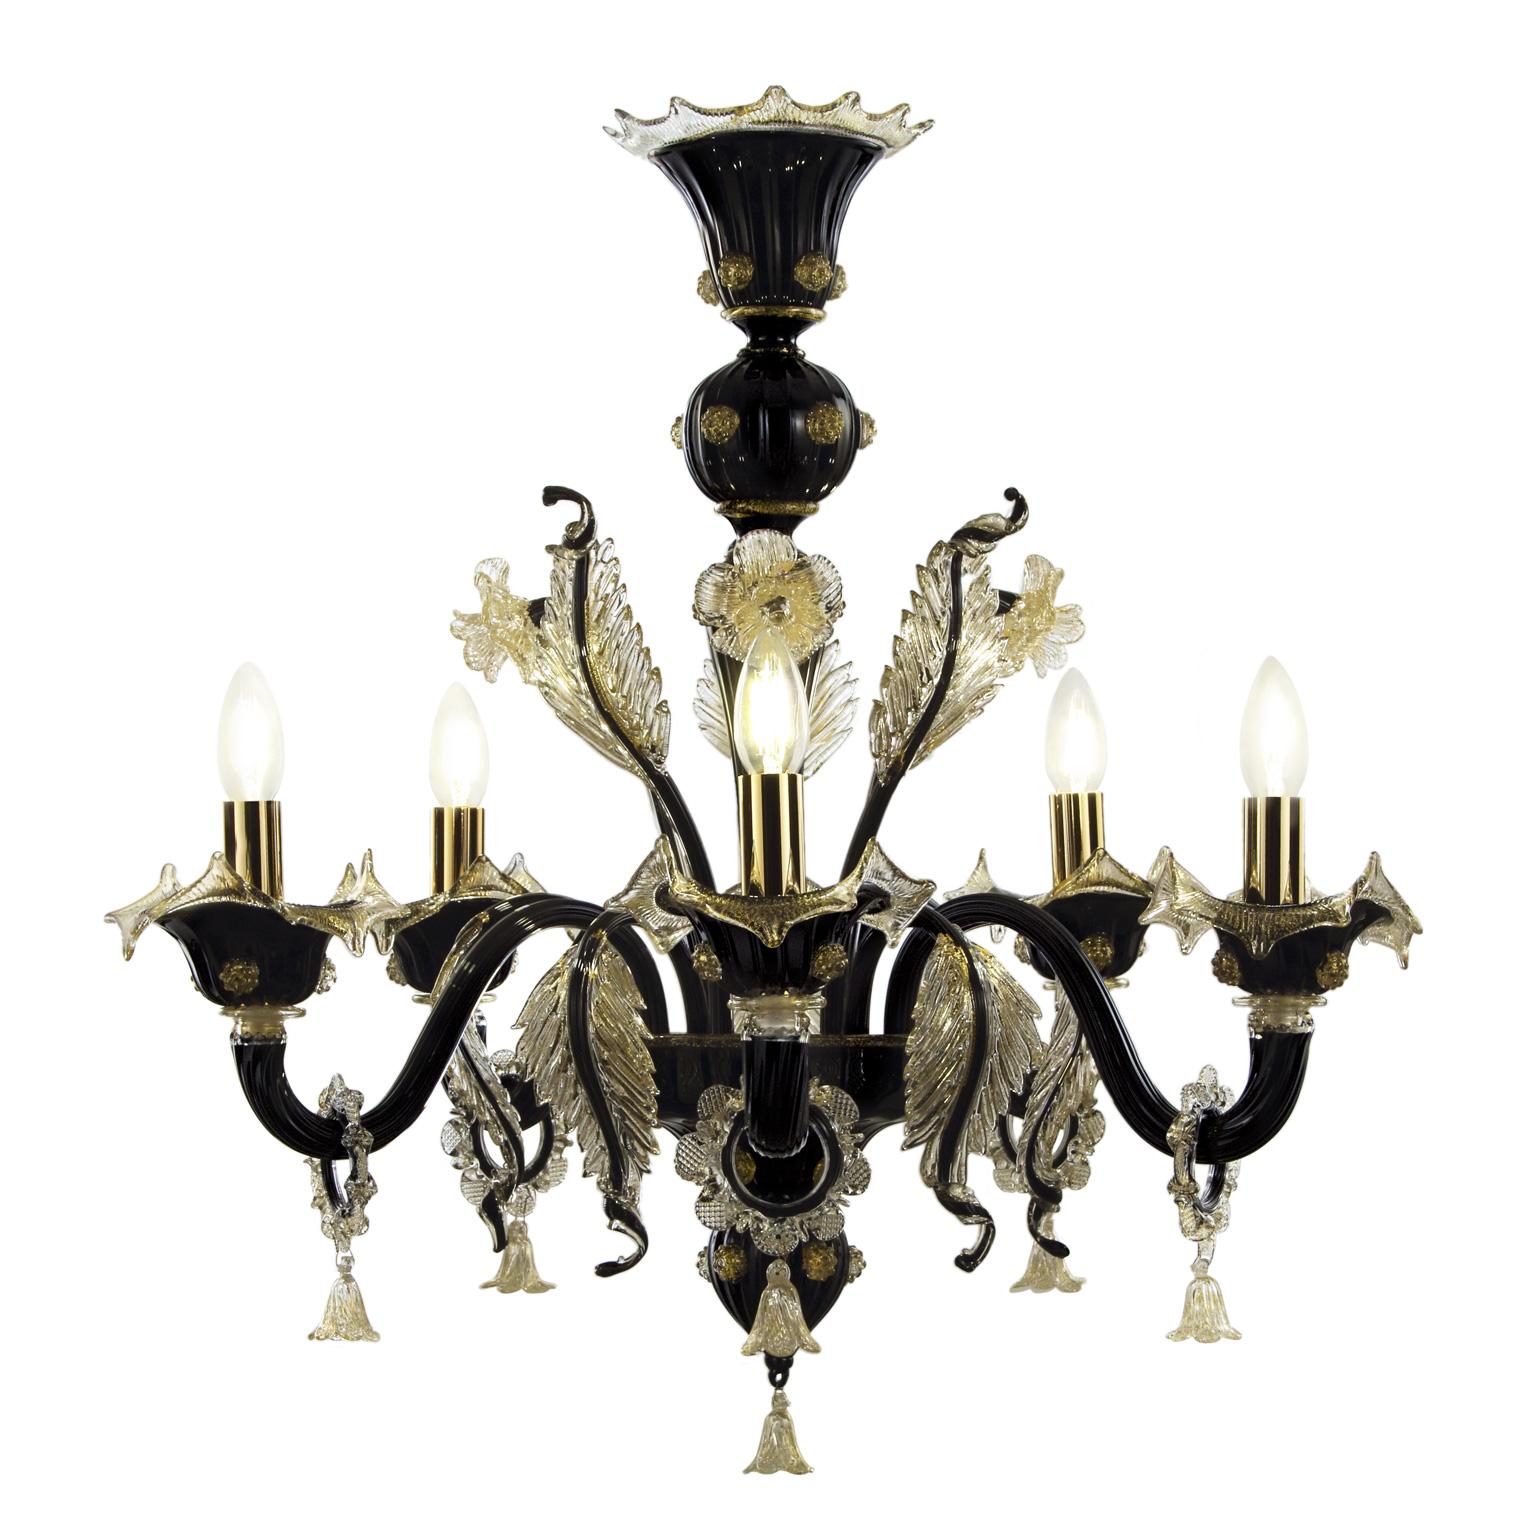 Bovary chandelier, 5 lights, in black artistic glass, with golden details by Multiforme is a luxury chandelier that will never be outmoded.
This collection takes inspiration from the Classic floral Venetian chandeliers, and it is available in many